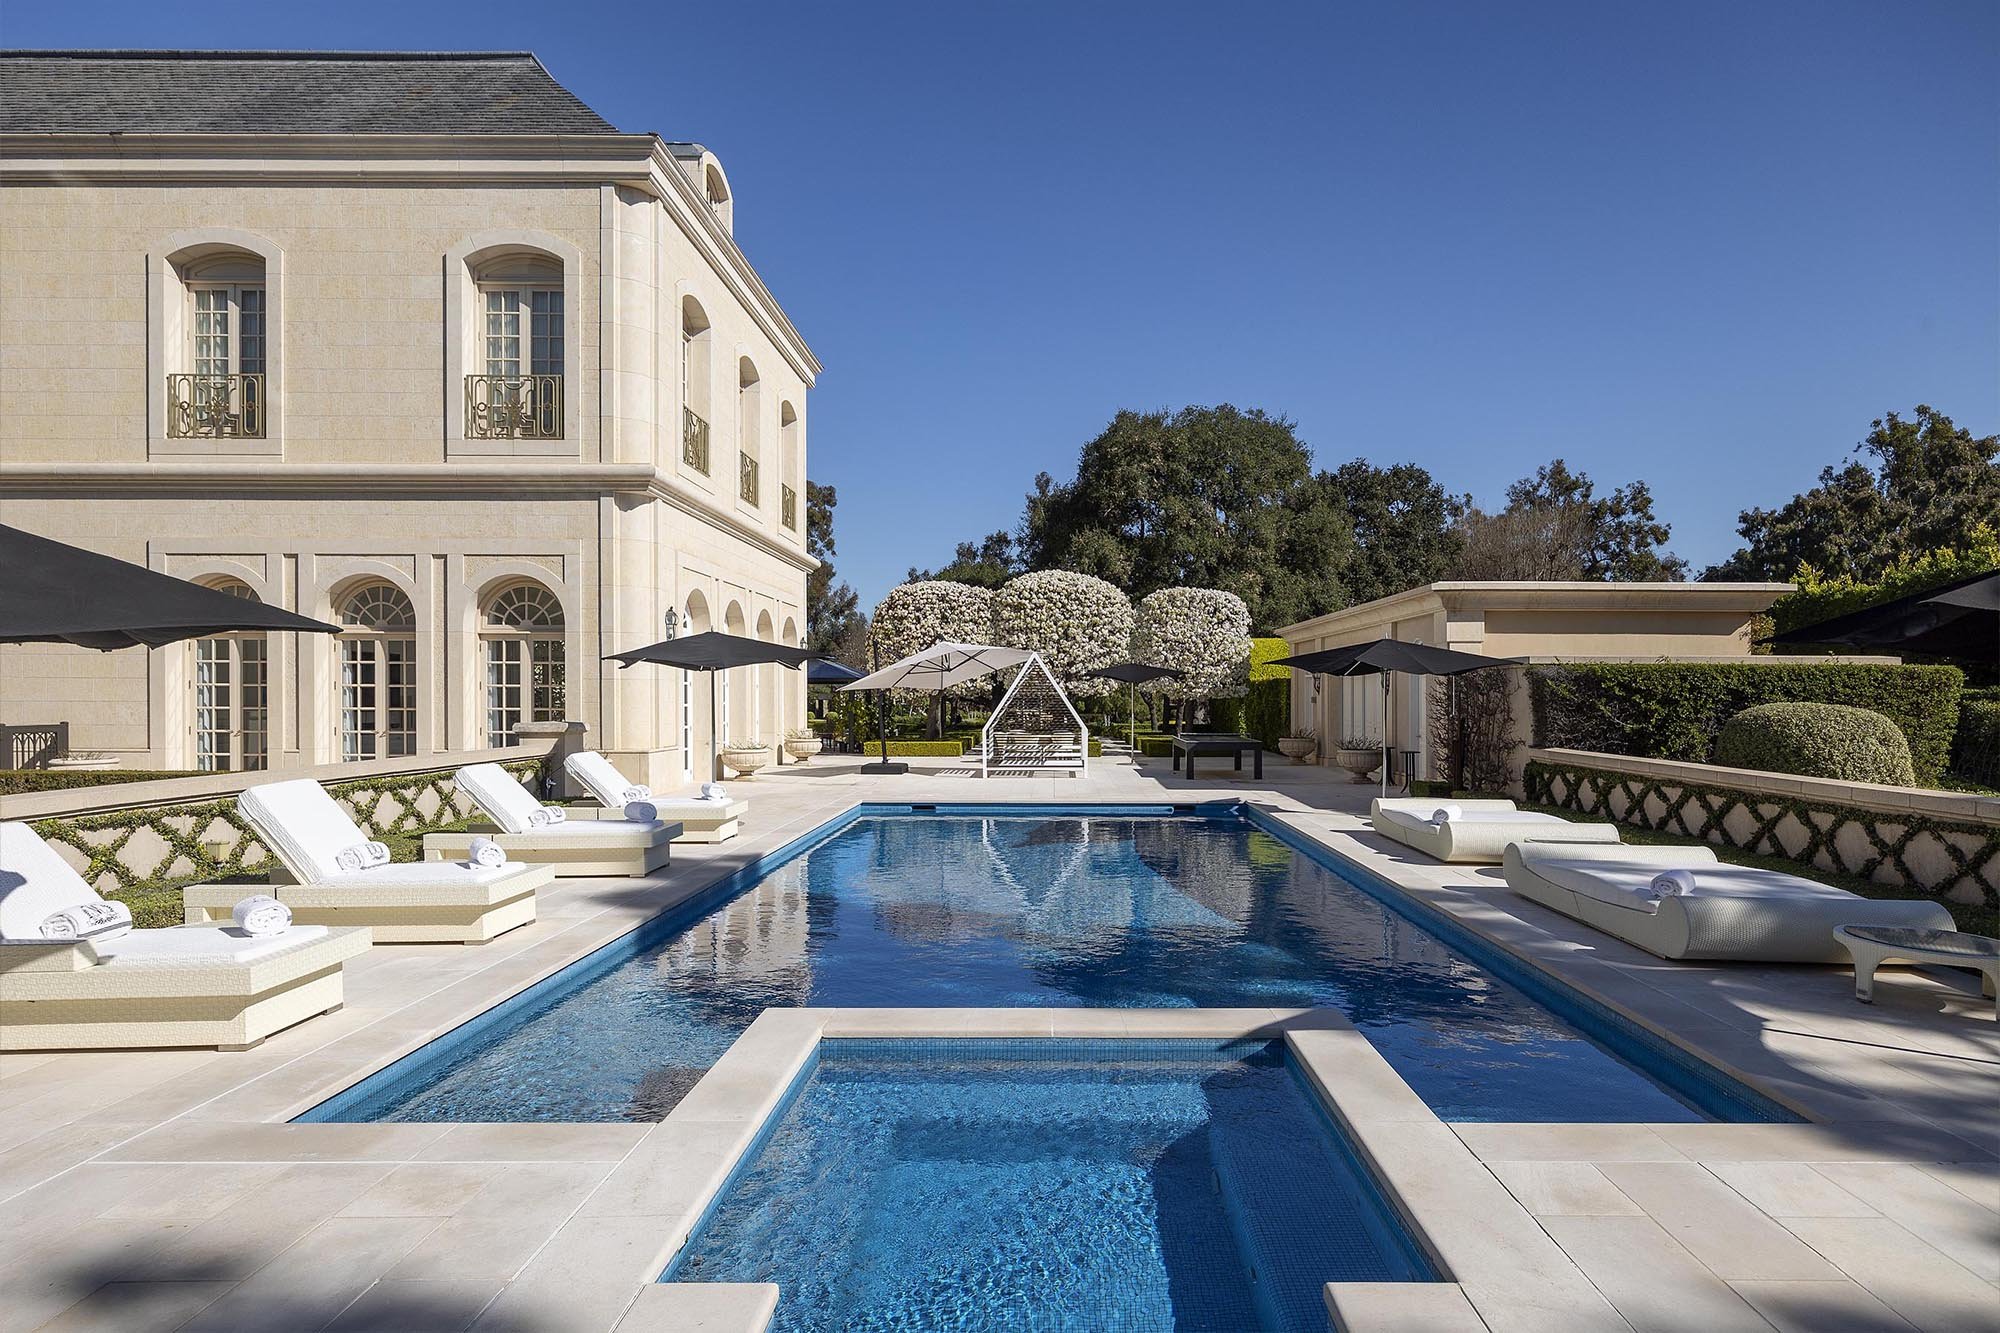 Francis York The 'Spelling Manor' is Back on the Market for $165M 7.jpg